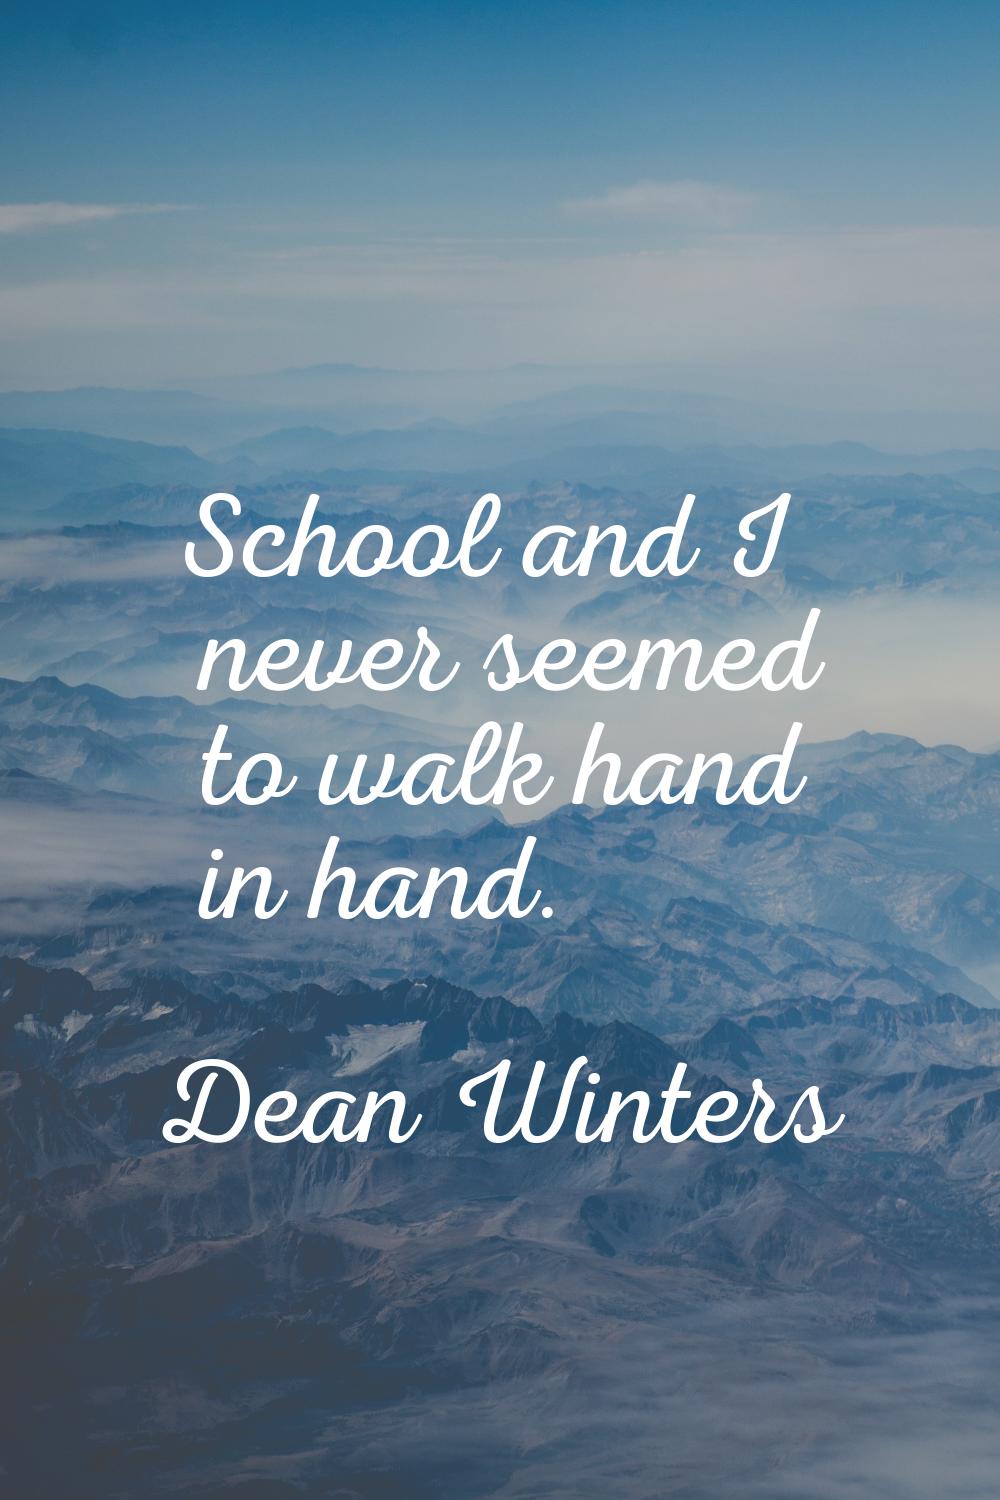 School and I never seemed to walk hand in hand.